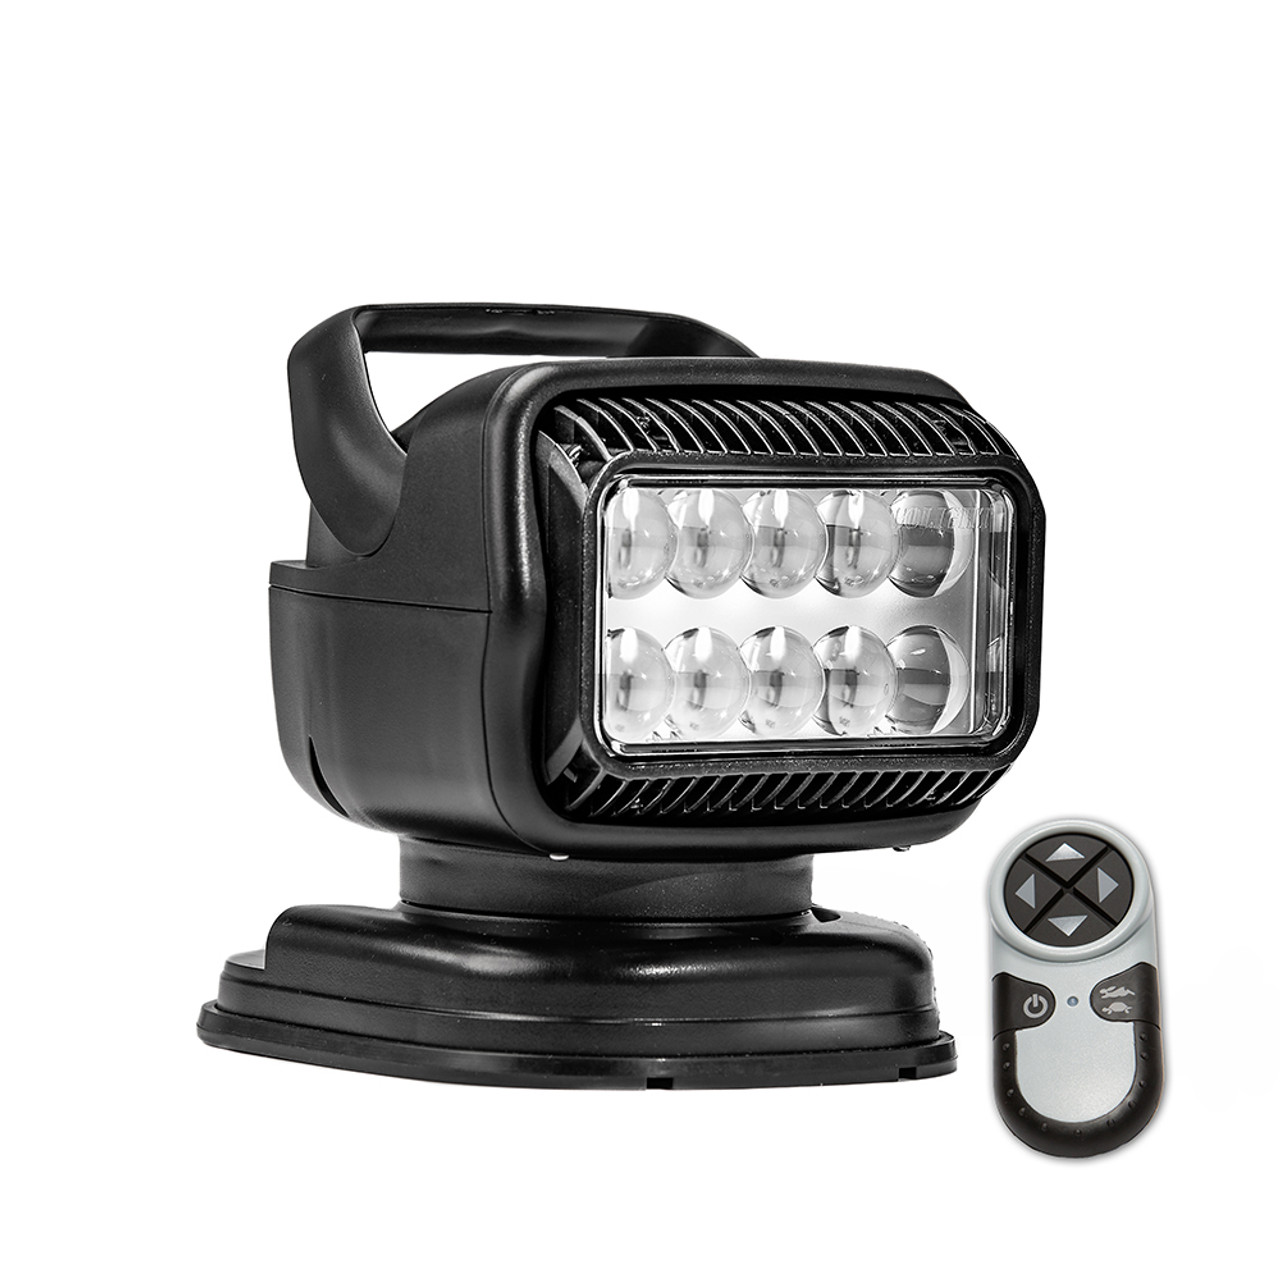 Golight 79014 Radioray Remote Control LED Searchlight, includes Magnetic  Mount Shoe, Programmable Wireless Remote, and 15 ft. Cord with Cigarette  Plug for 12v DC, available in White or Black - Dana Safety Supply